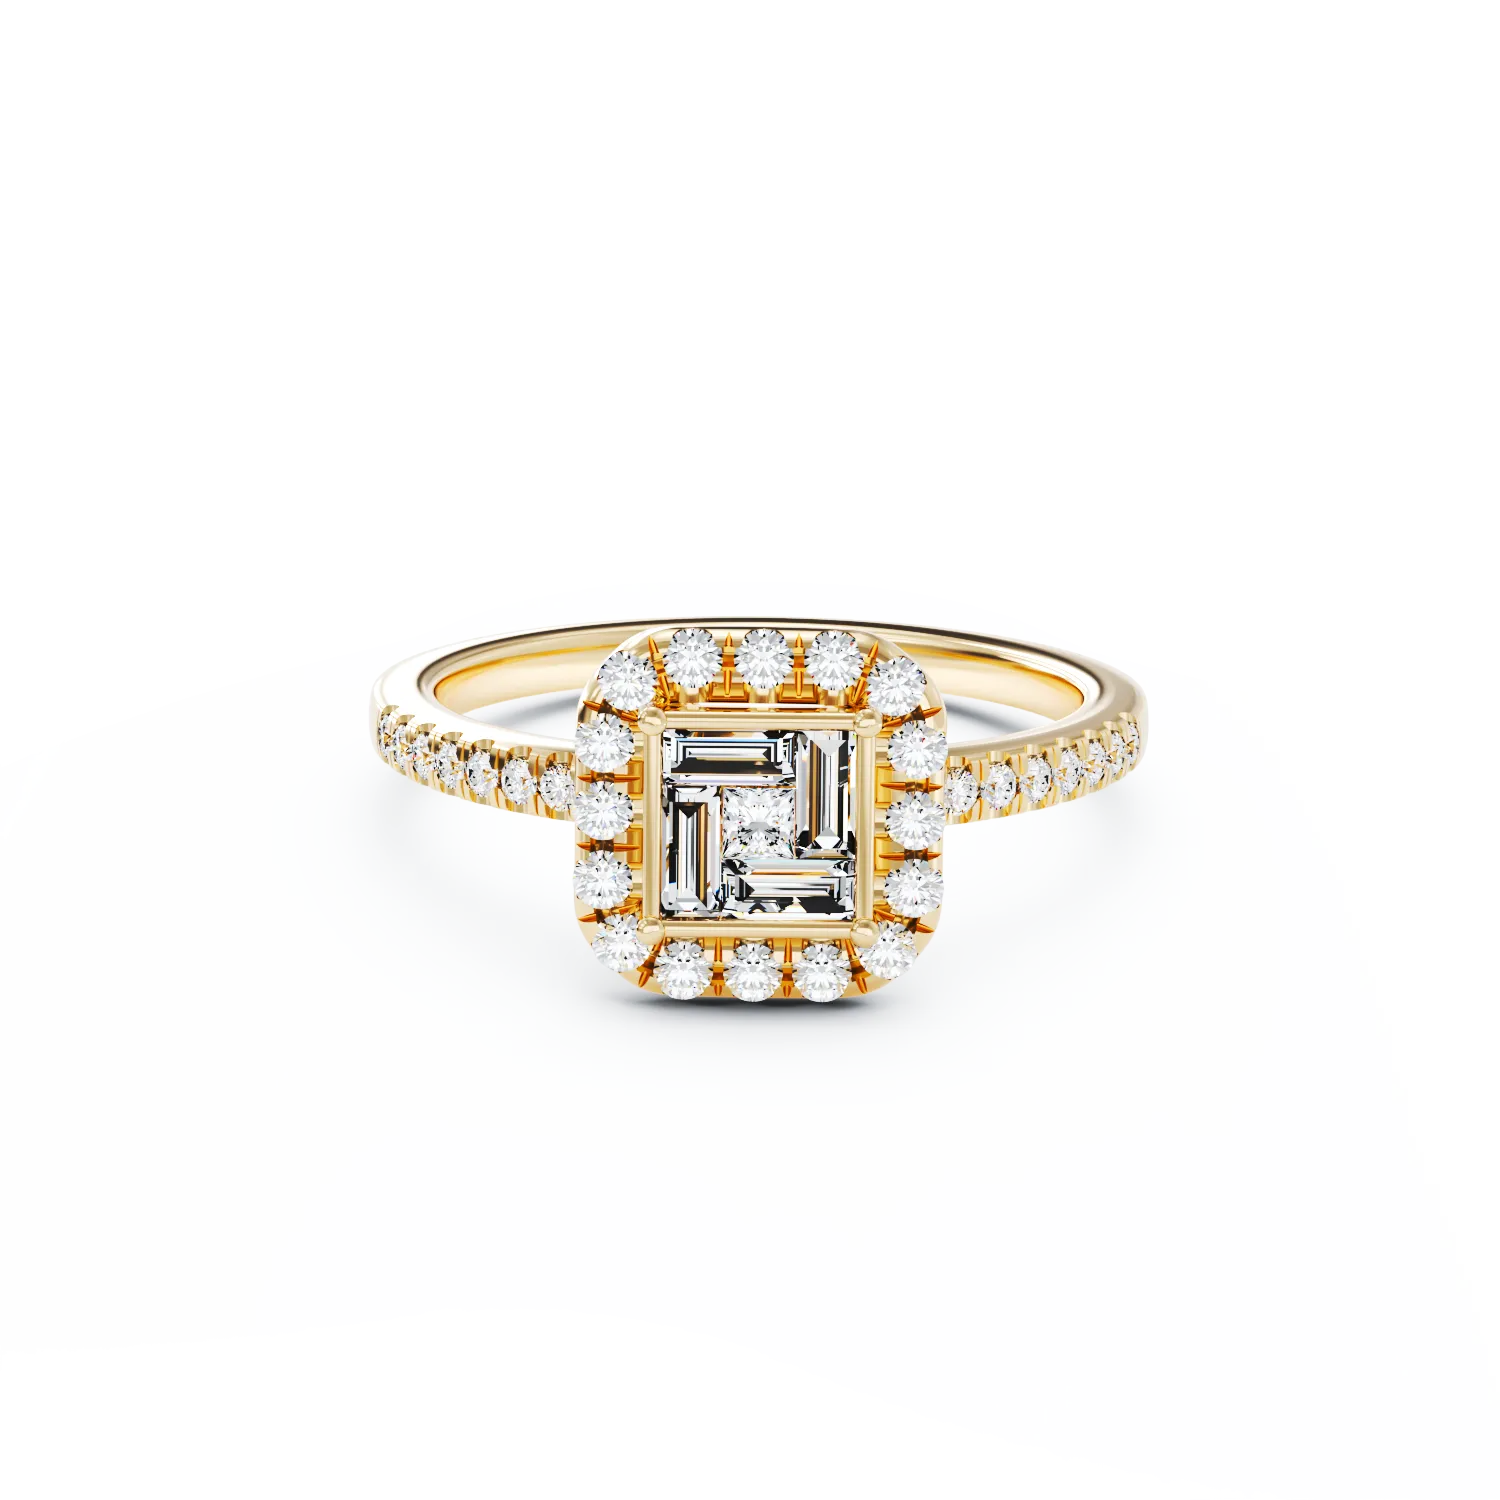 18K yellow gold engagement ring with 0.46ct diamonds